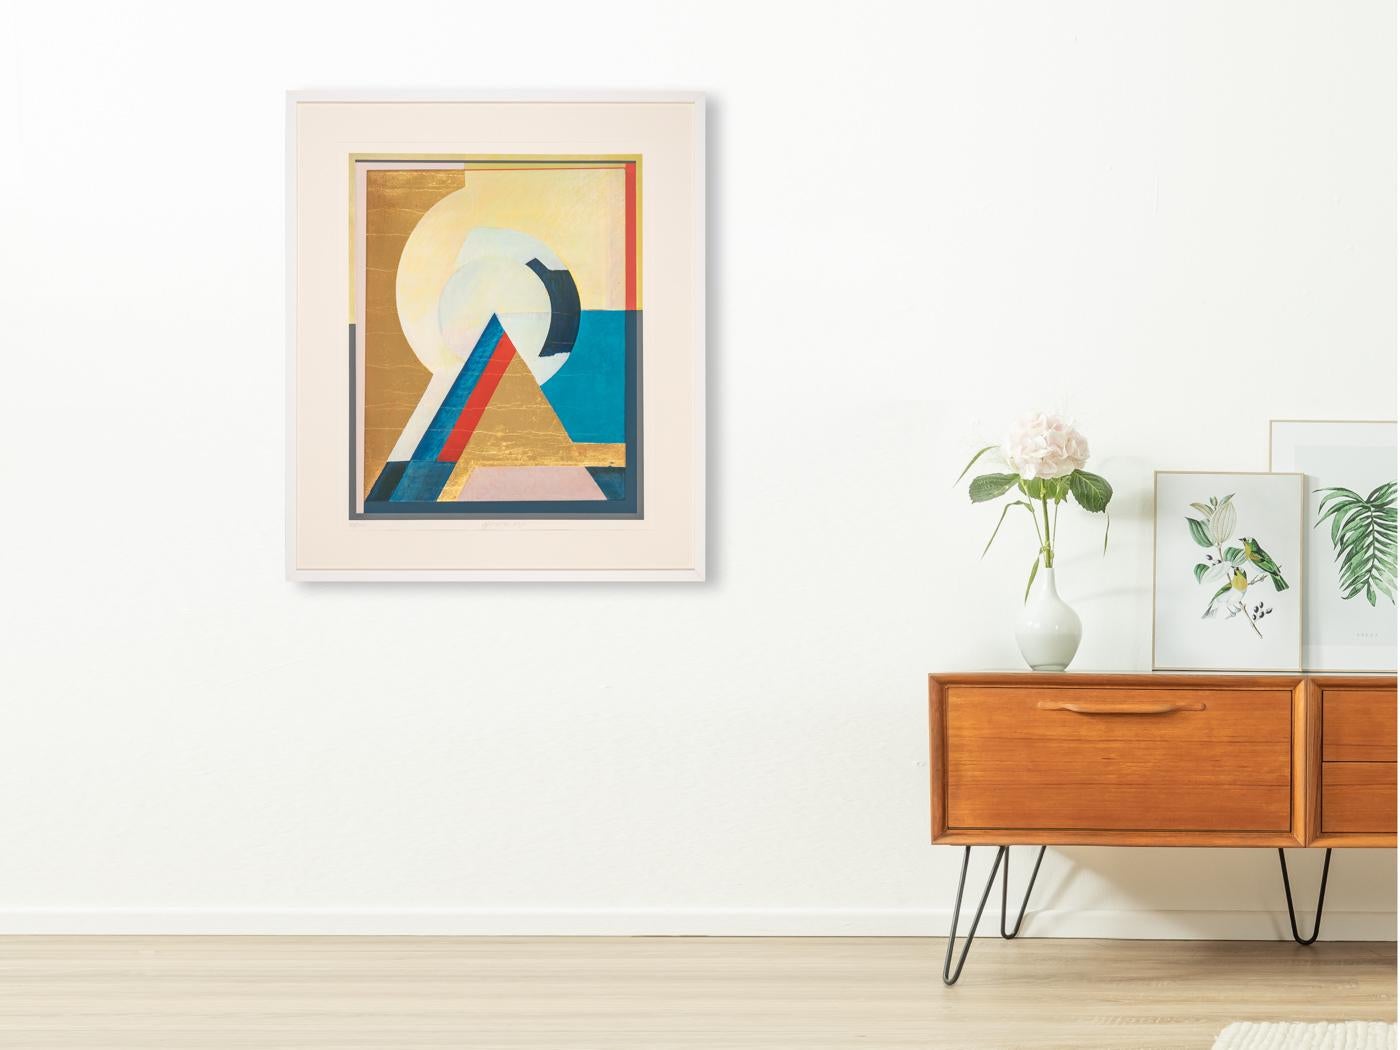 Otto Herbert HAJEK Pyramide with a mix of shinig and mat surfaces. Colorful and and abstract offset printing on thick paper from 1992. Handsigned and numbered (18/100). Ready to hang, framed with a passepartout in a handcrafted real wood picture